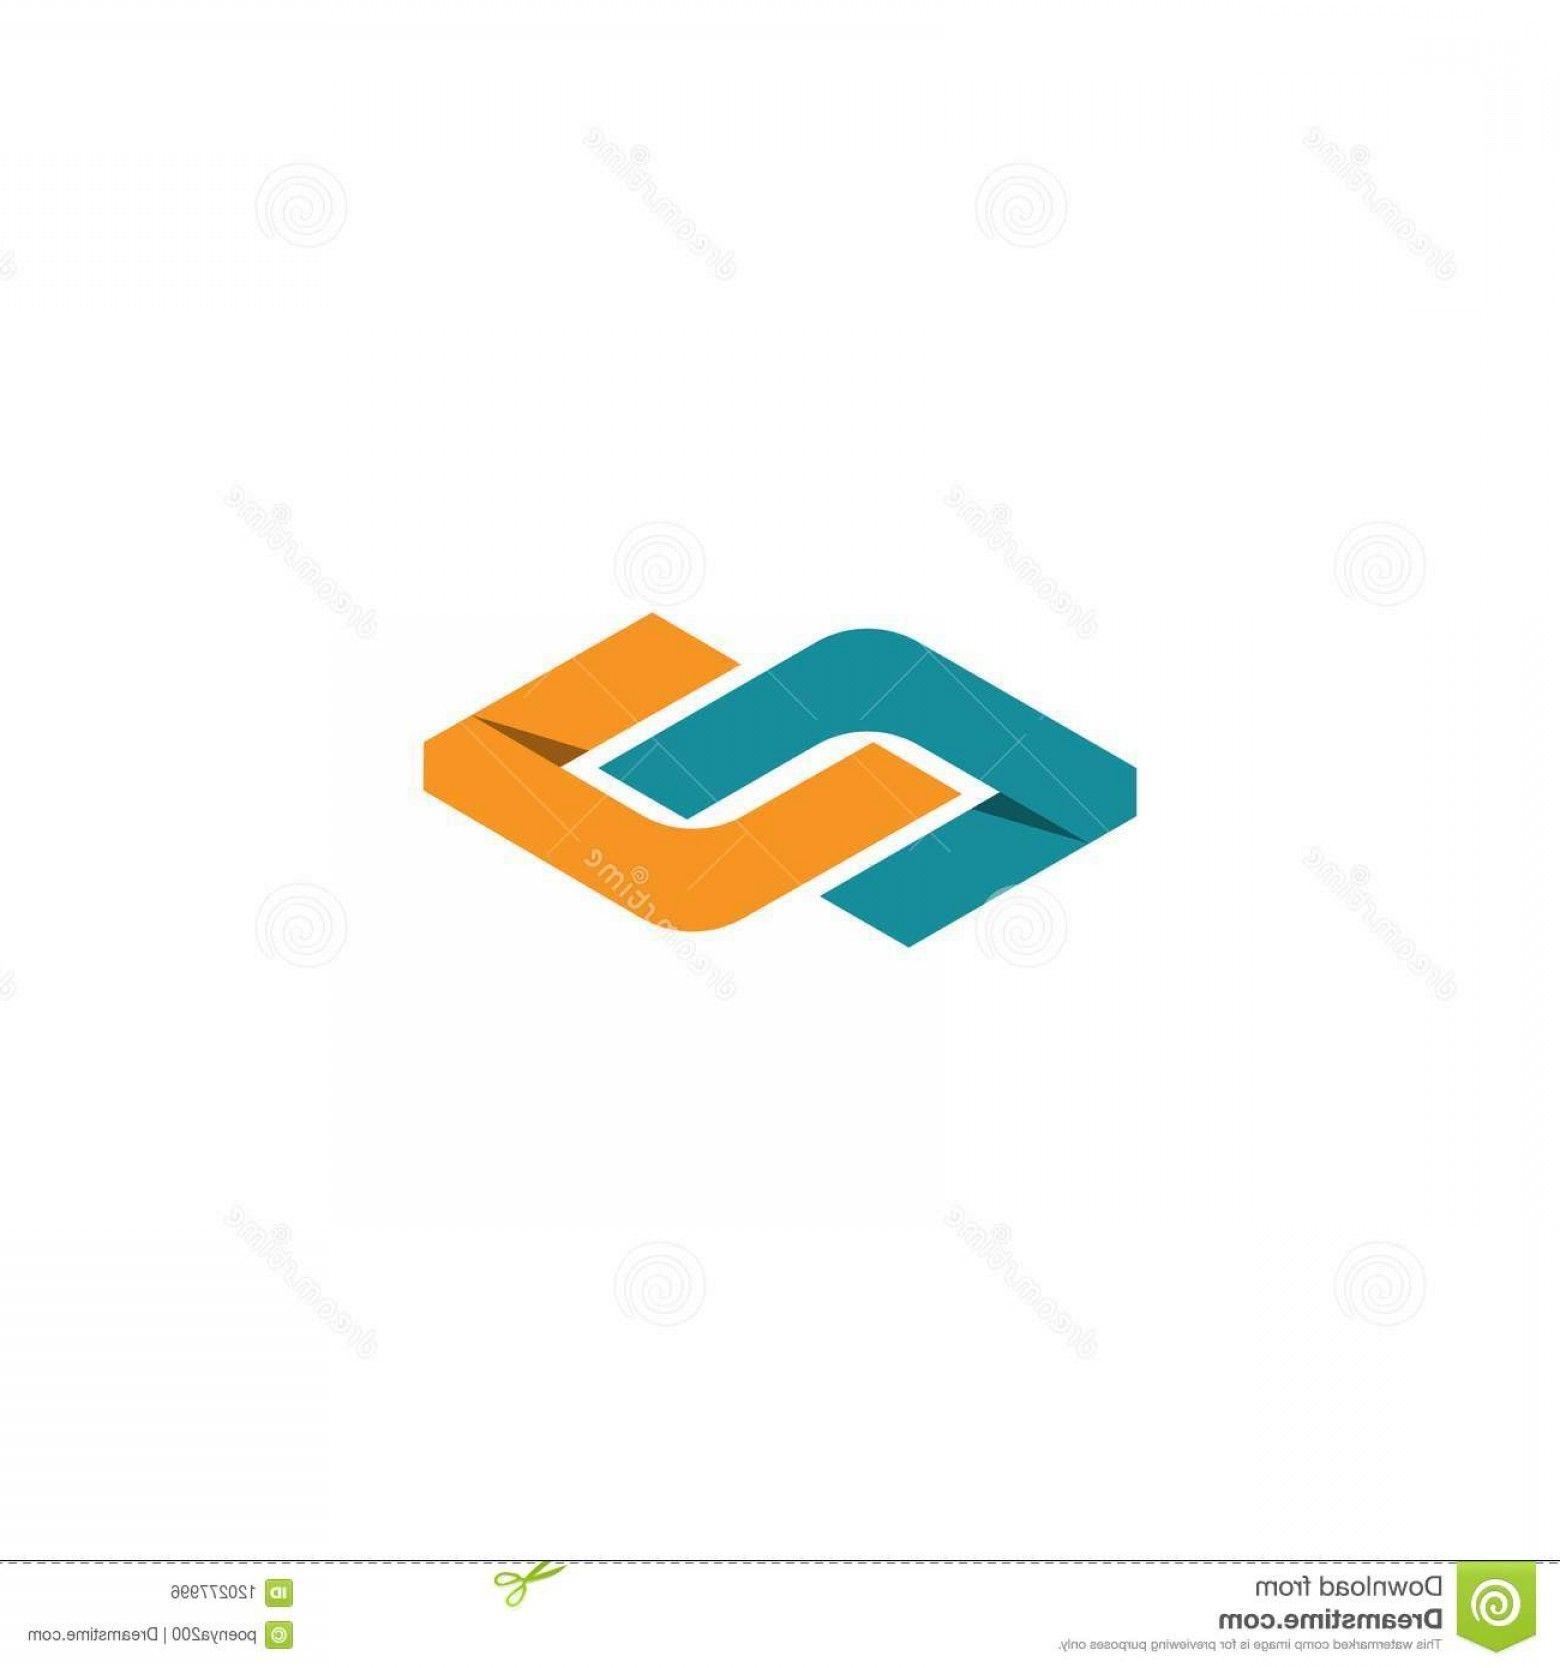 Use Gradient of Colors in Logo - Abstract Infinity Letter Nu Chain Cube Logo Element Concept Gradient ...